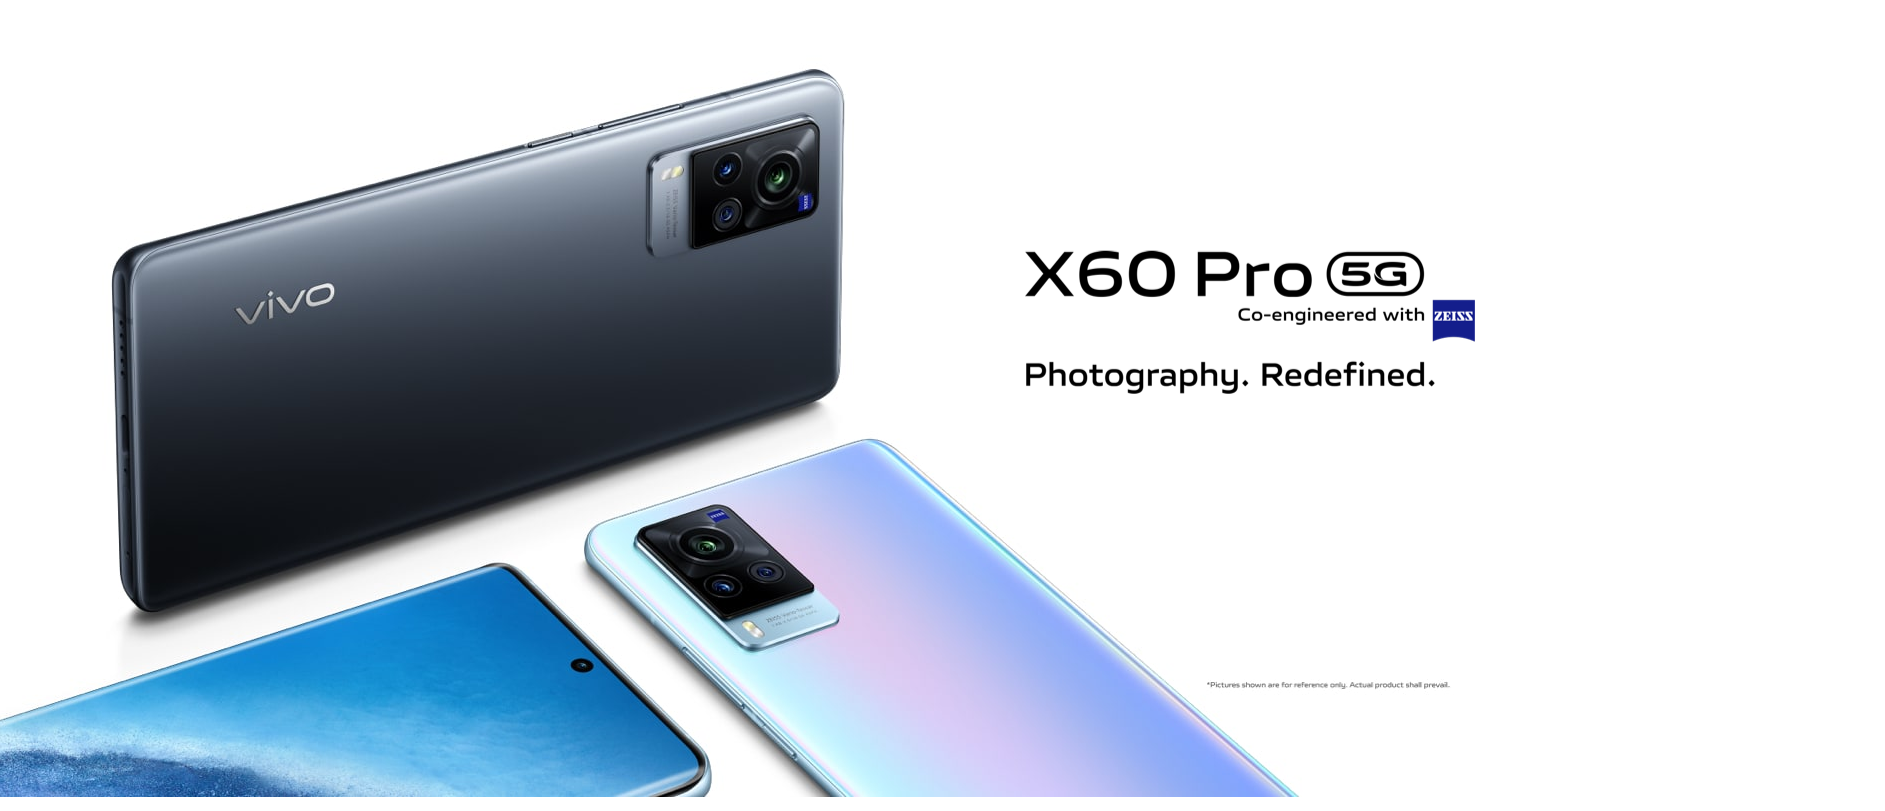 The Vivo X60 Pro comes with a 6.56-inch 120 Hz Full HD+ AMOLED display. It has a 4,200mAh battery with 33W fast charging support.